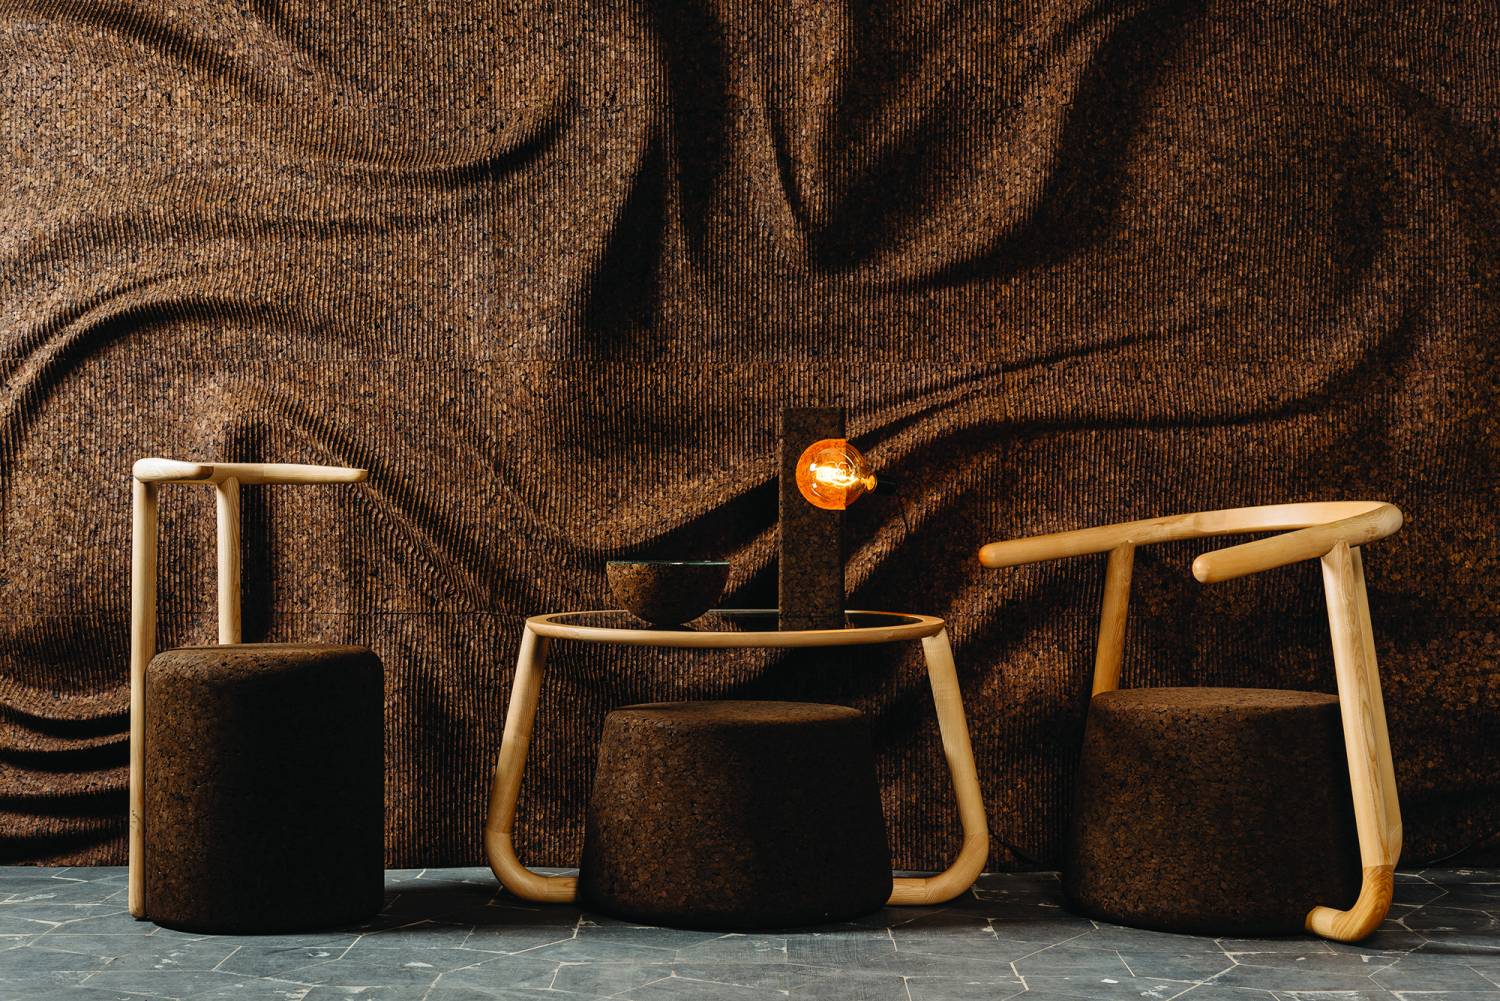 Cork covering solutions and furniture by Gencork - Flodeau.com